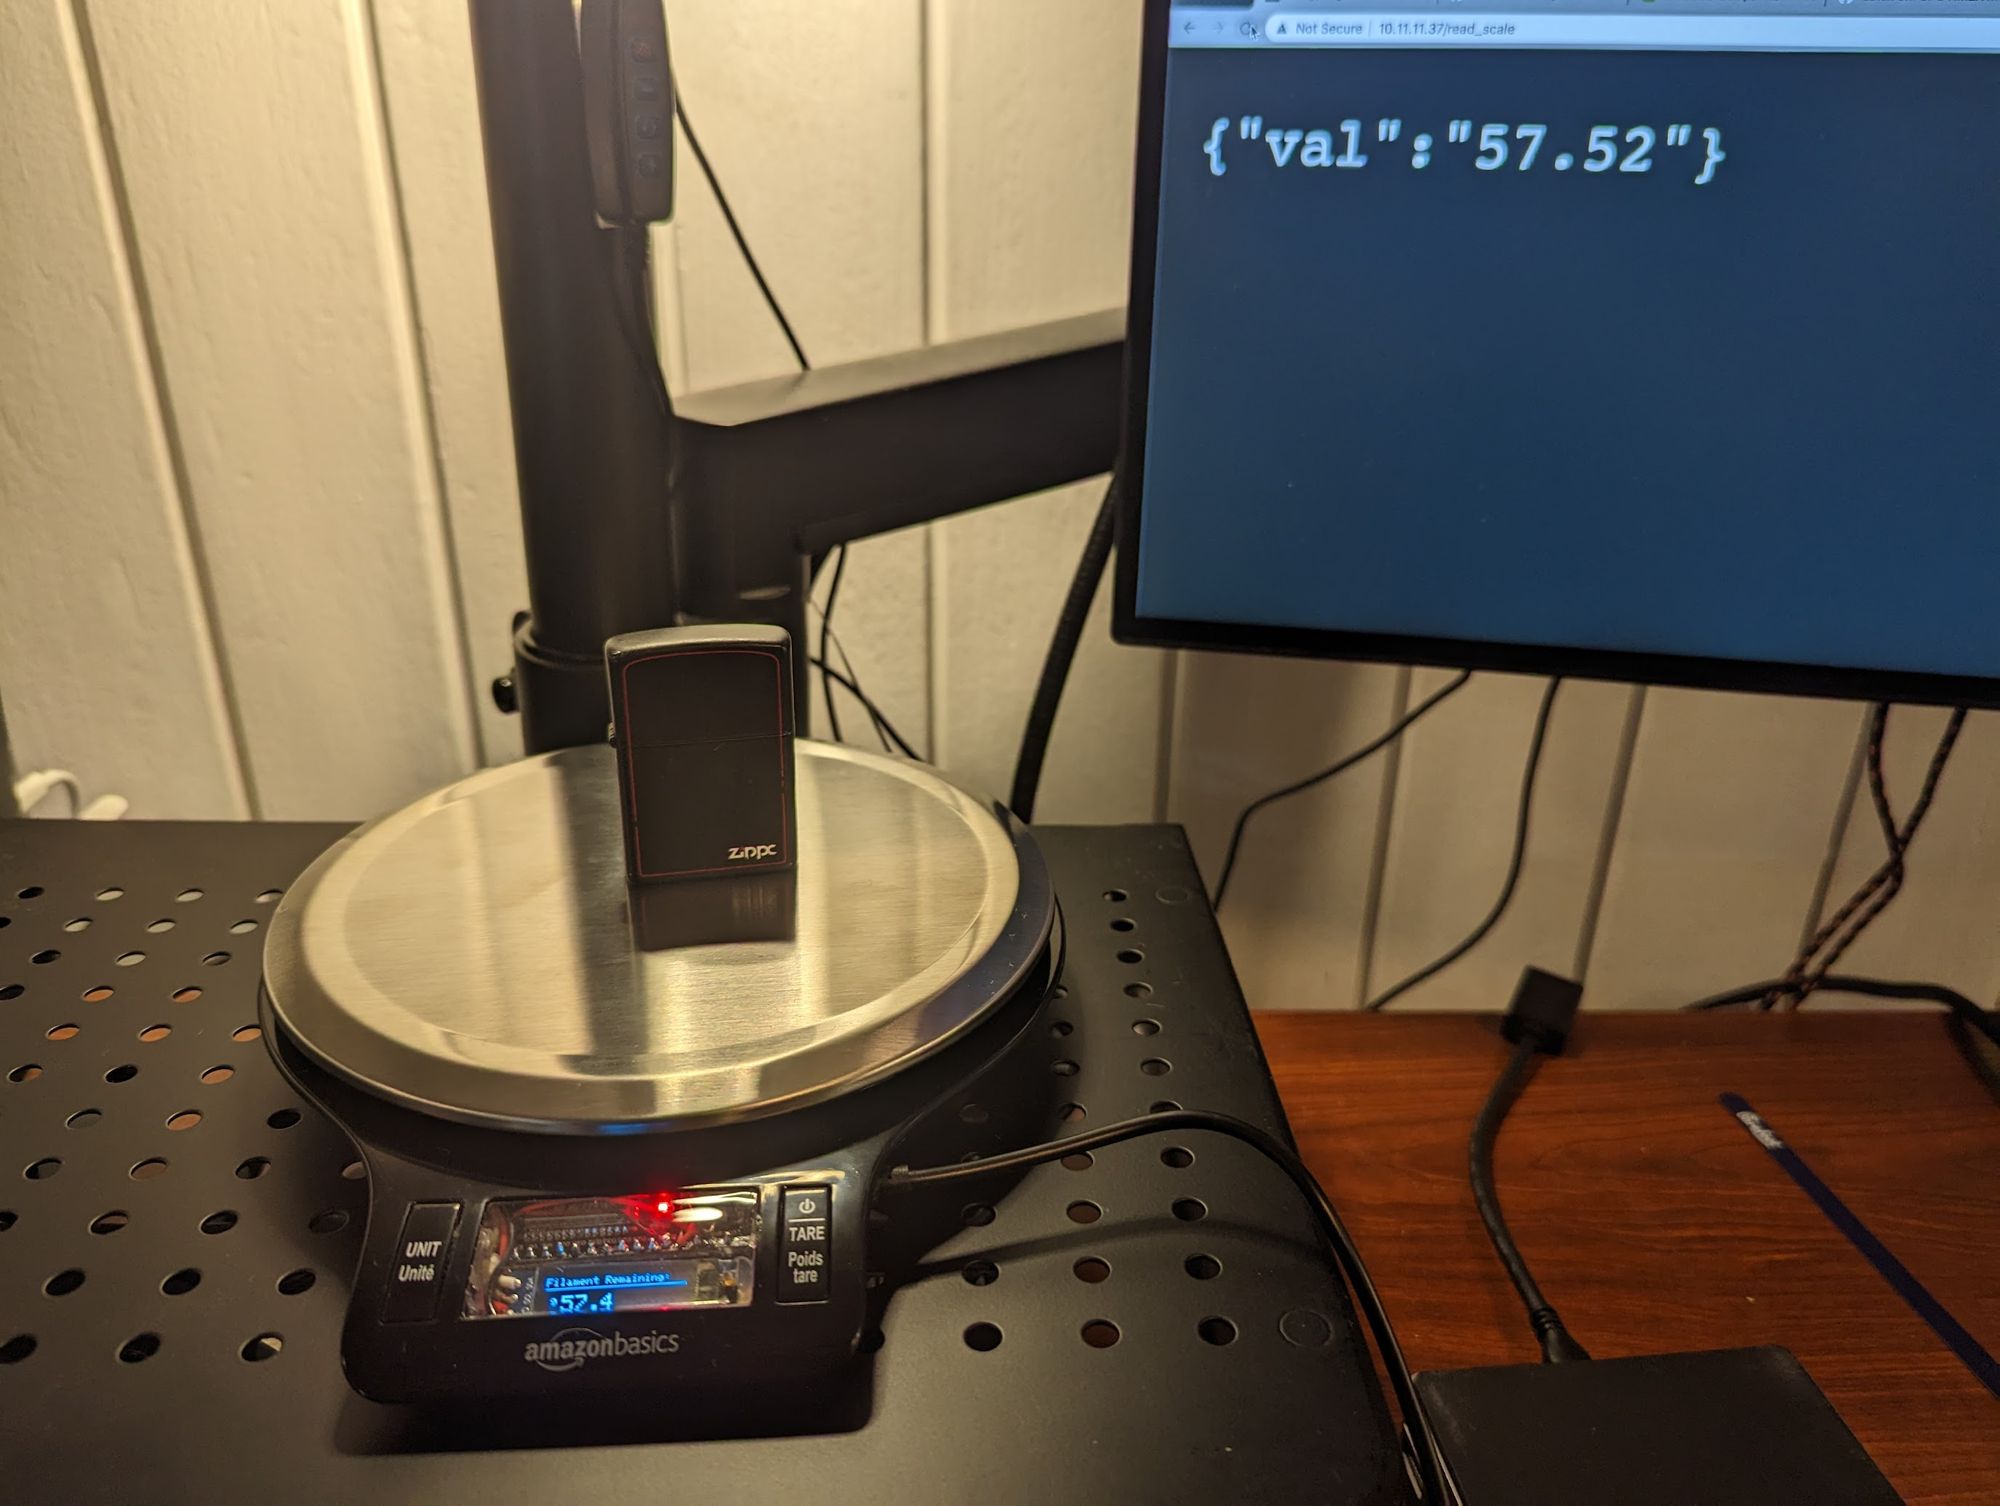 Turning a $10 kitchen scale into a WiFi smart scale for Home Assistant